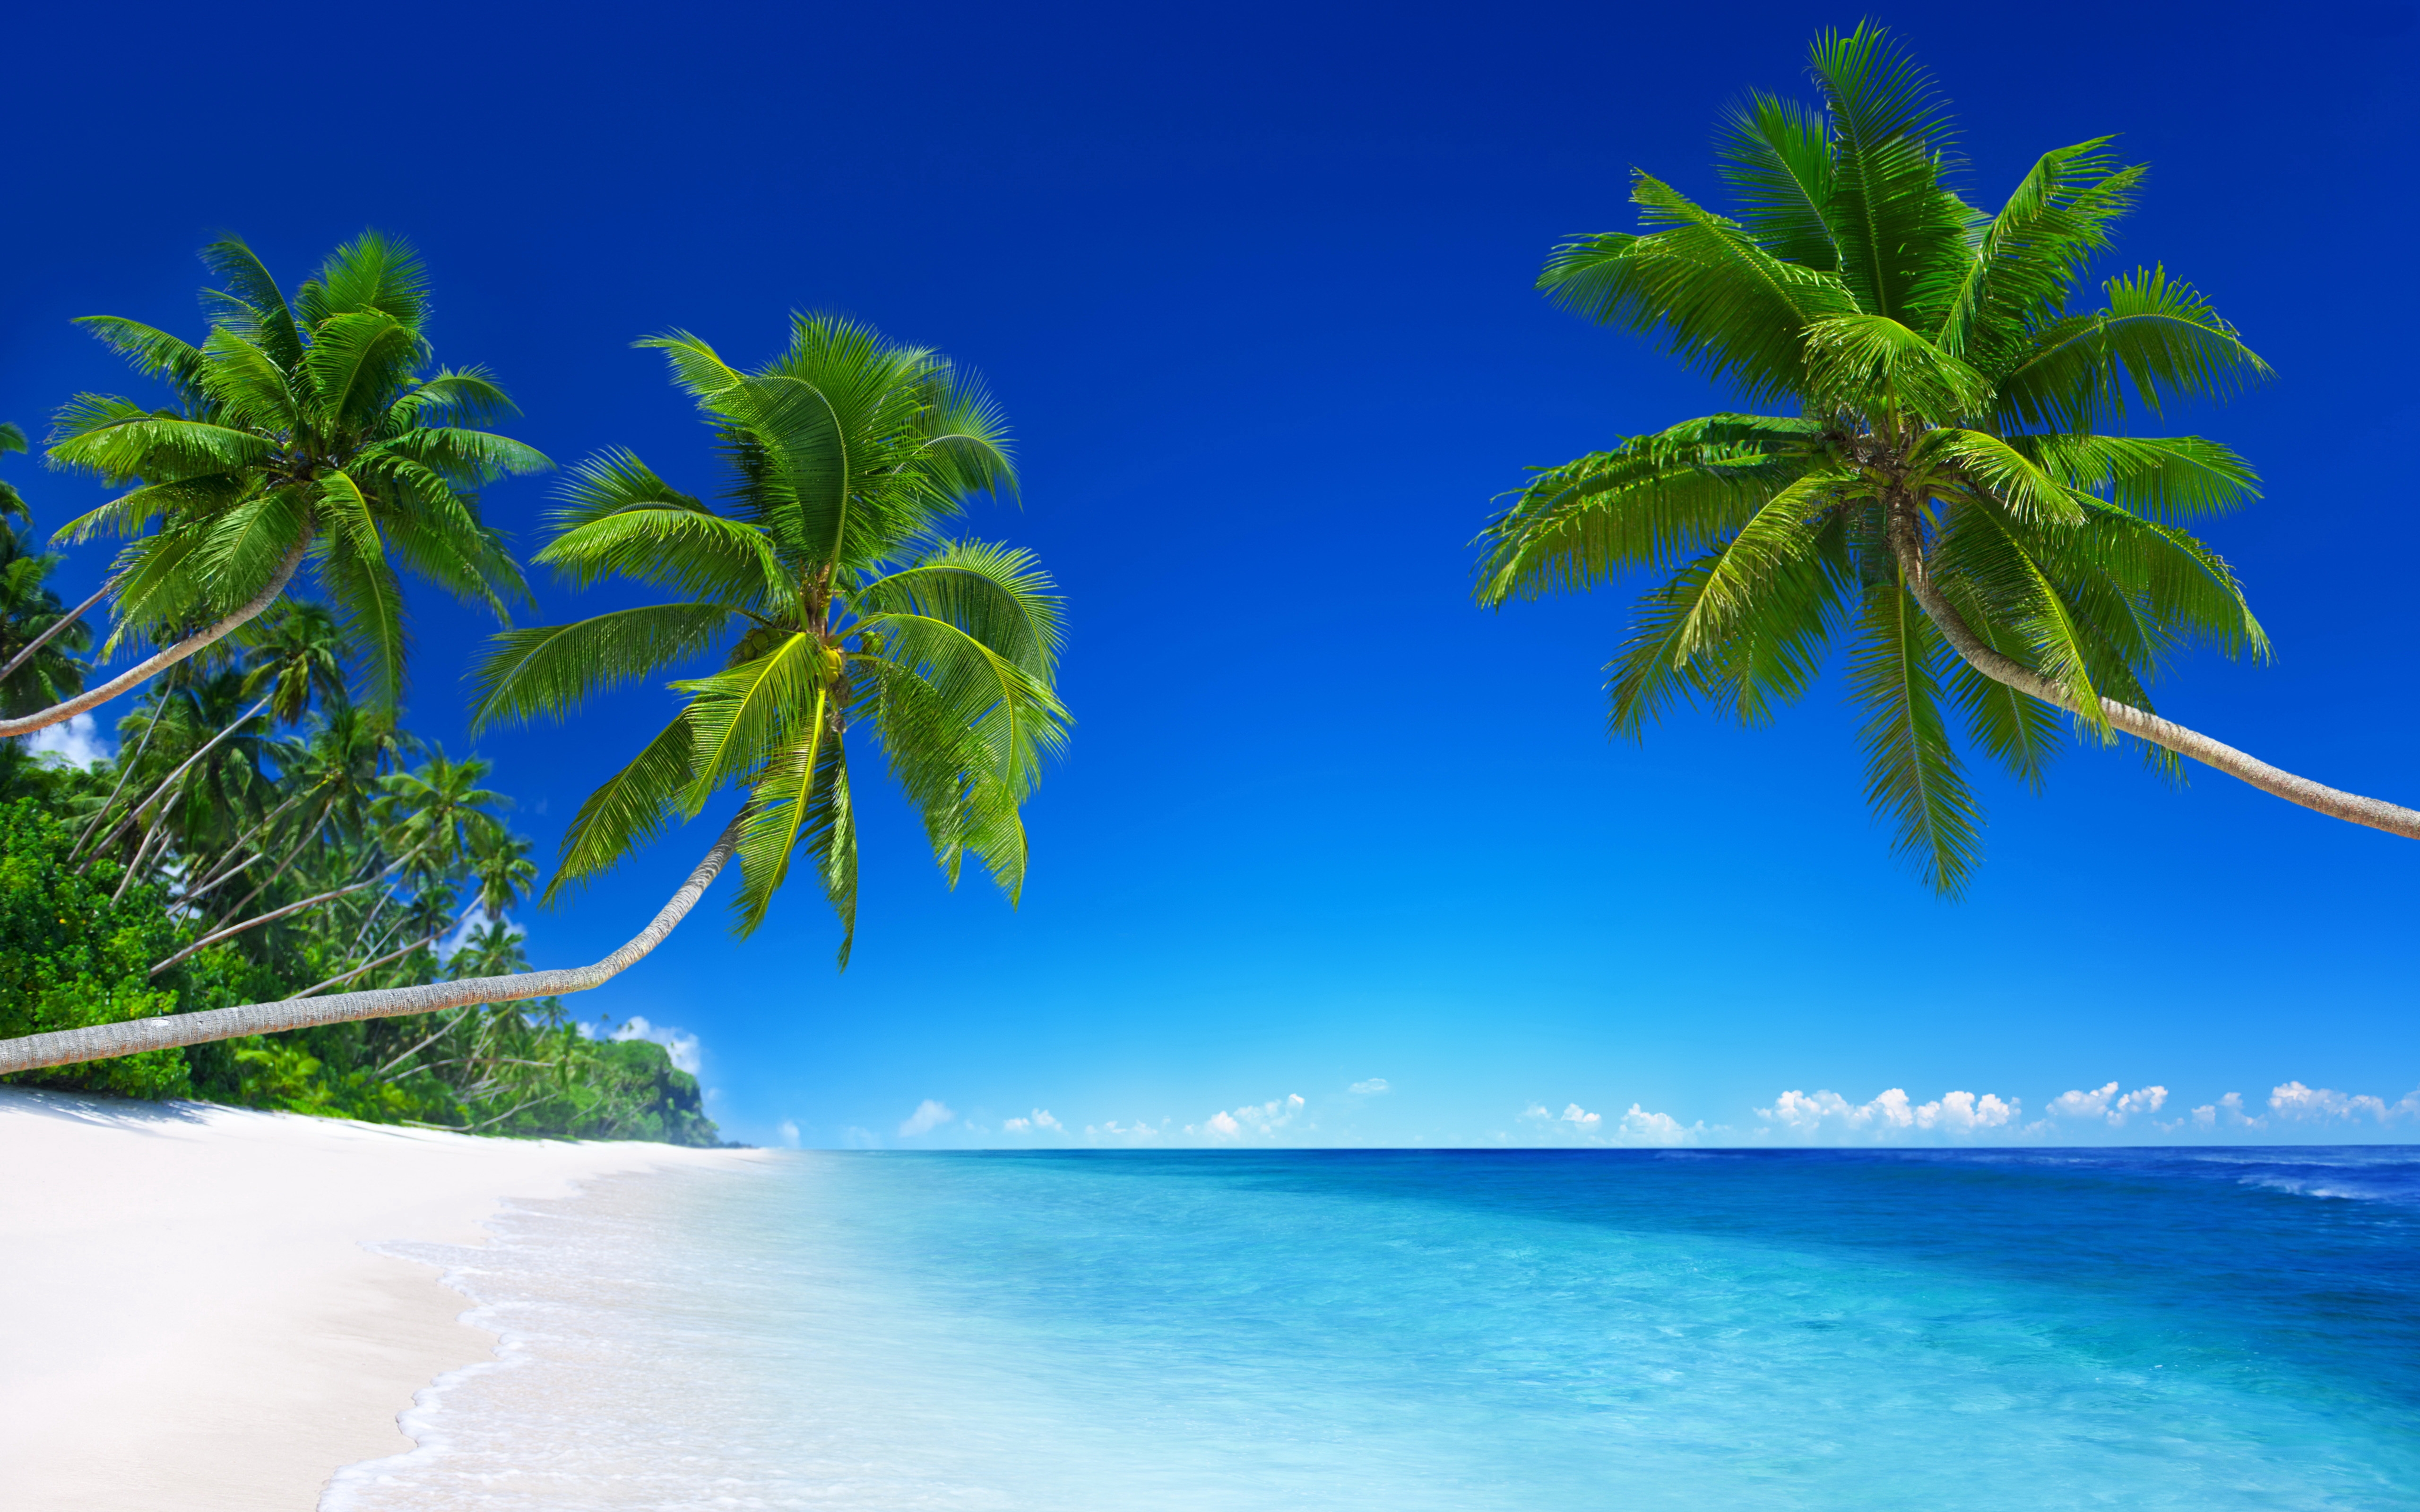 Tropical Beach Paradise 5K Wallpapers | HD Wallpapers | ID #18455